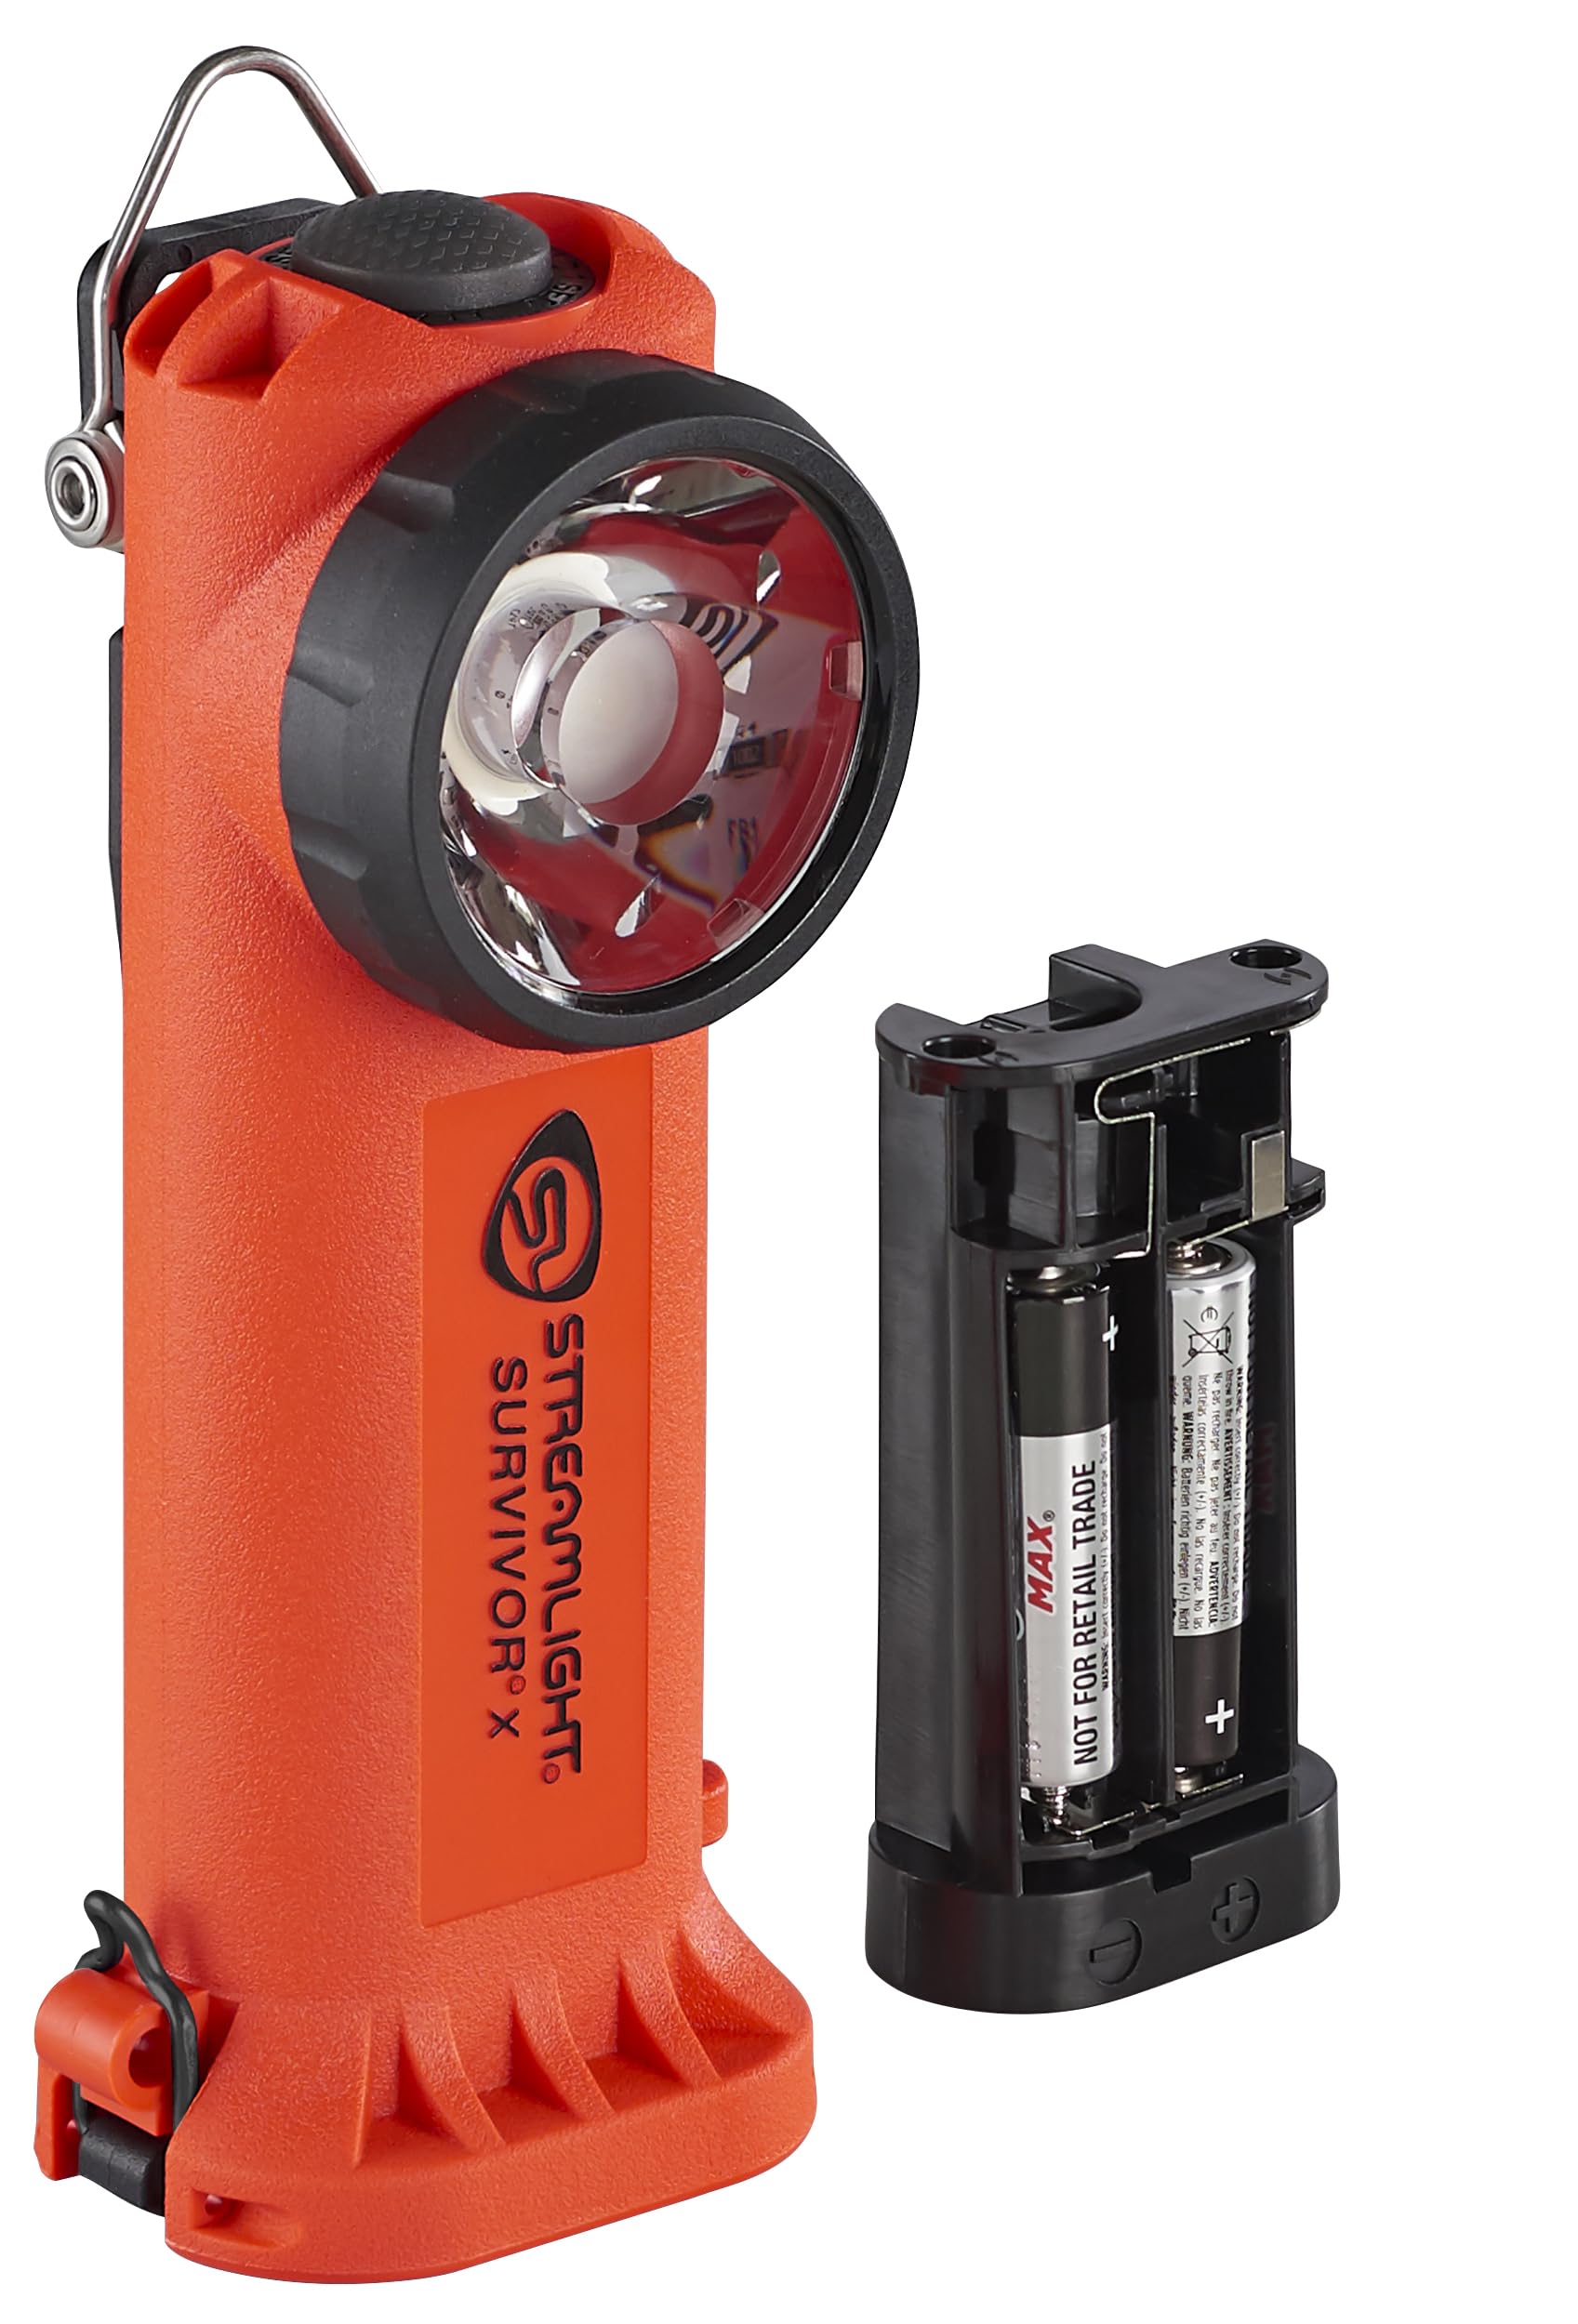 Streamlight 90950 Survivor X 250-Lumens C1D1 Safety-Rated Right-Angle Flashlight, Includes Alkaline Batteries and Holder, Orange